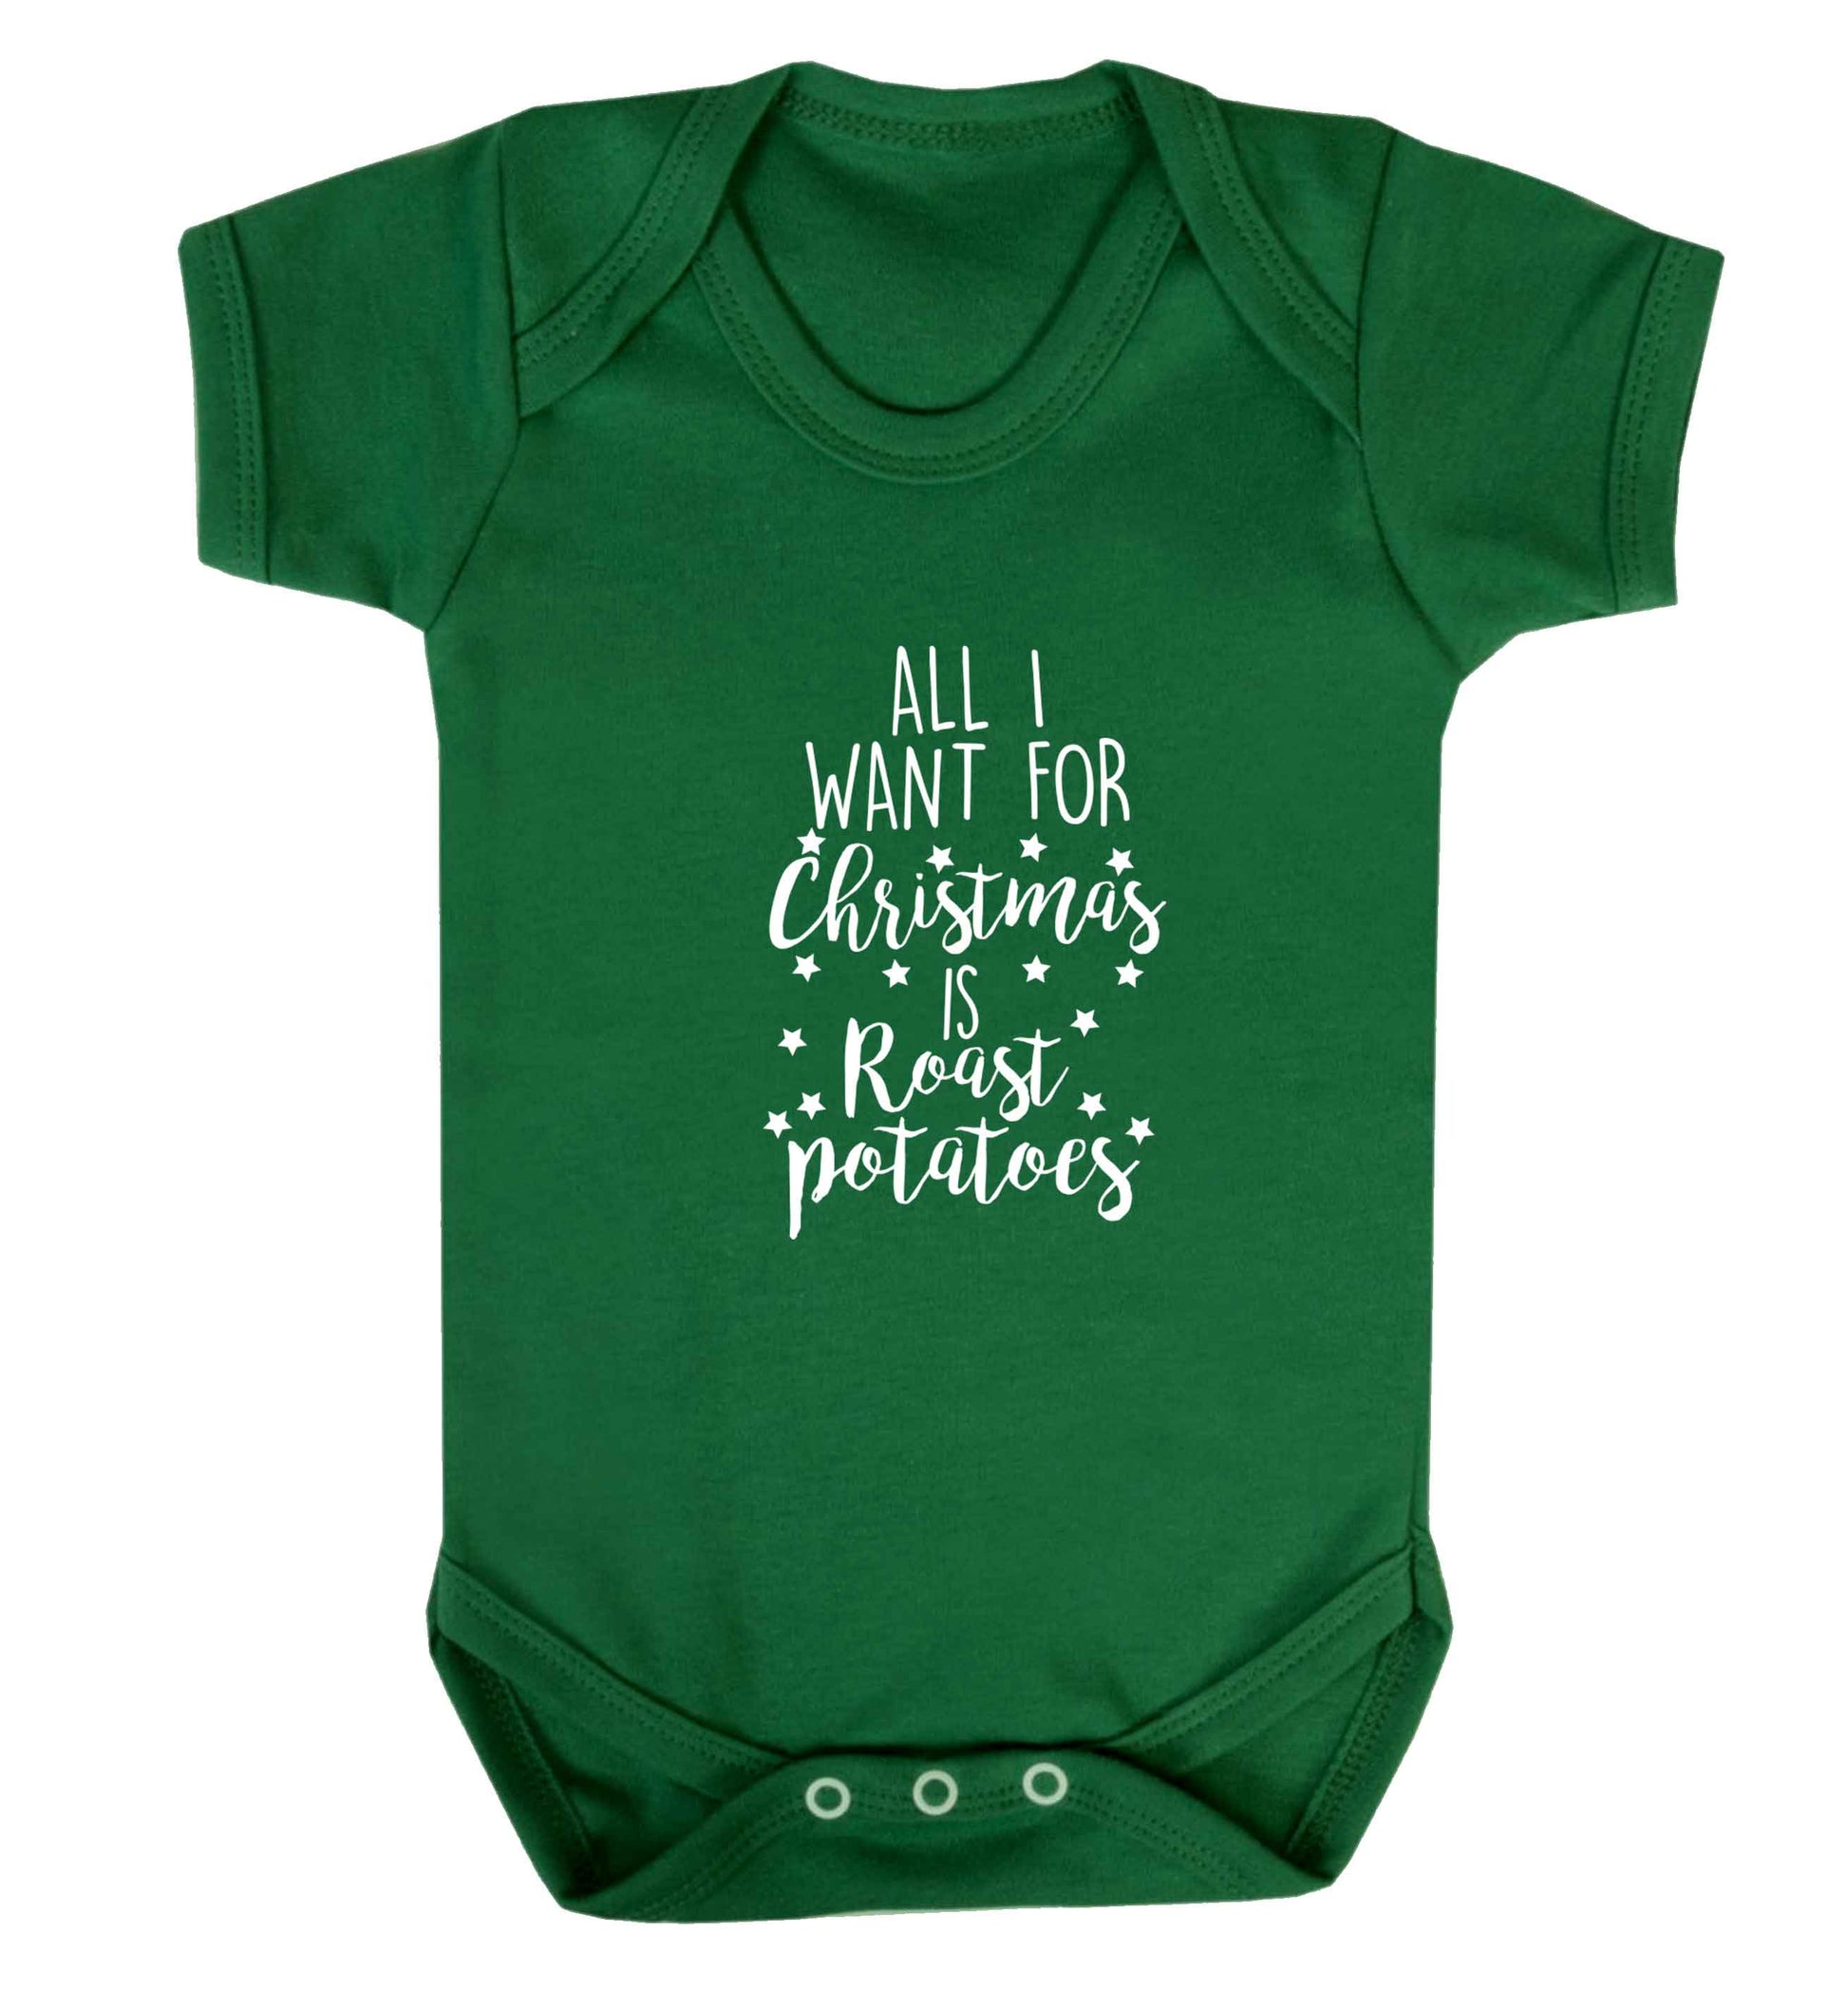 All I want for Christmas is roast potatoes baby vest green 18-24 months